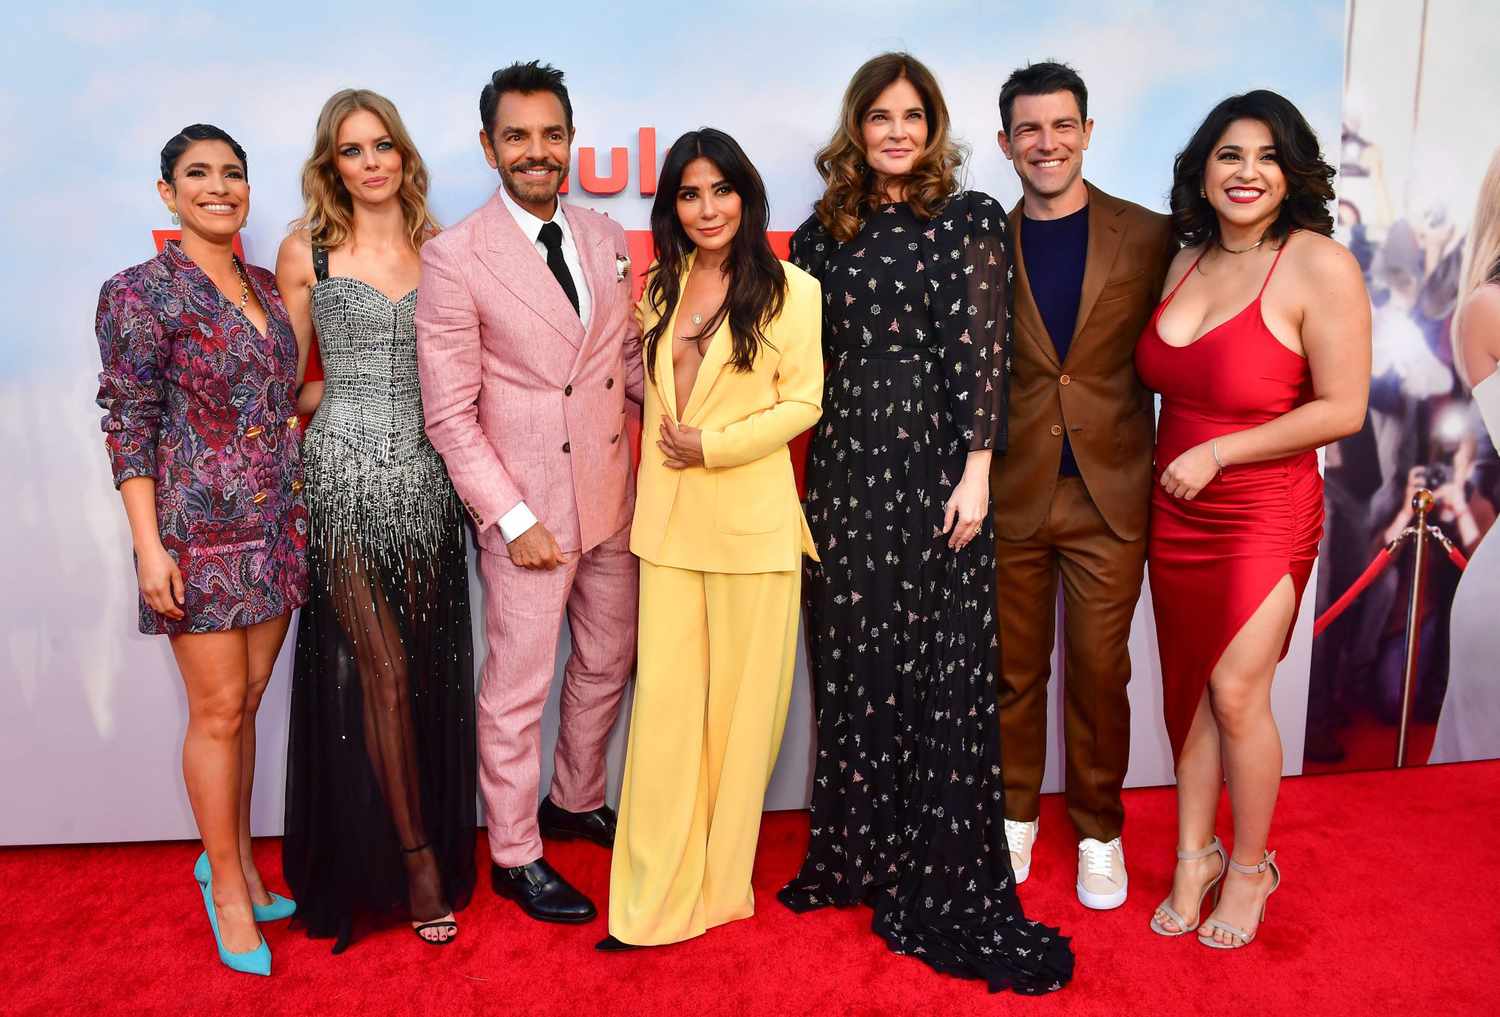 Diany Rodriguez, Samara Weaving, Eugenio Derbez, Marisol Nichols, Betsy Brandt, Max Greenfield and Noemi Gonzalez attend Hulus "The Valet" premiere at the Montalban theatre in Hollywood, California, May 11, 2022.